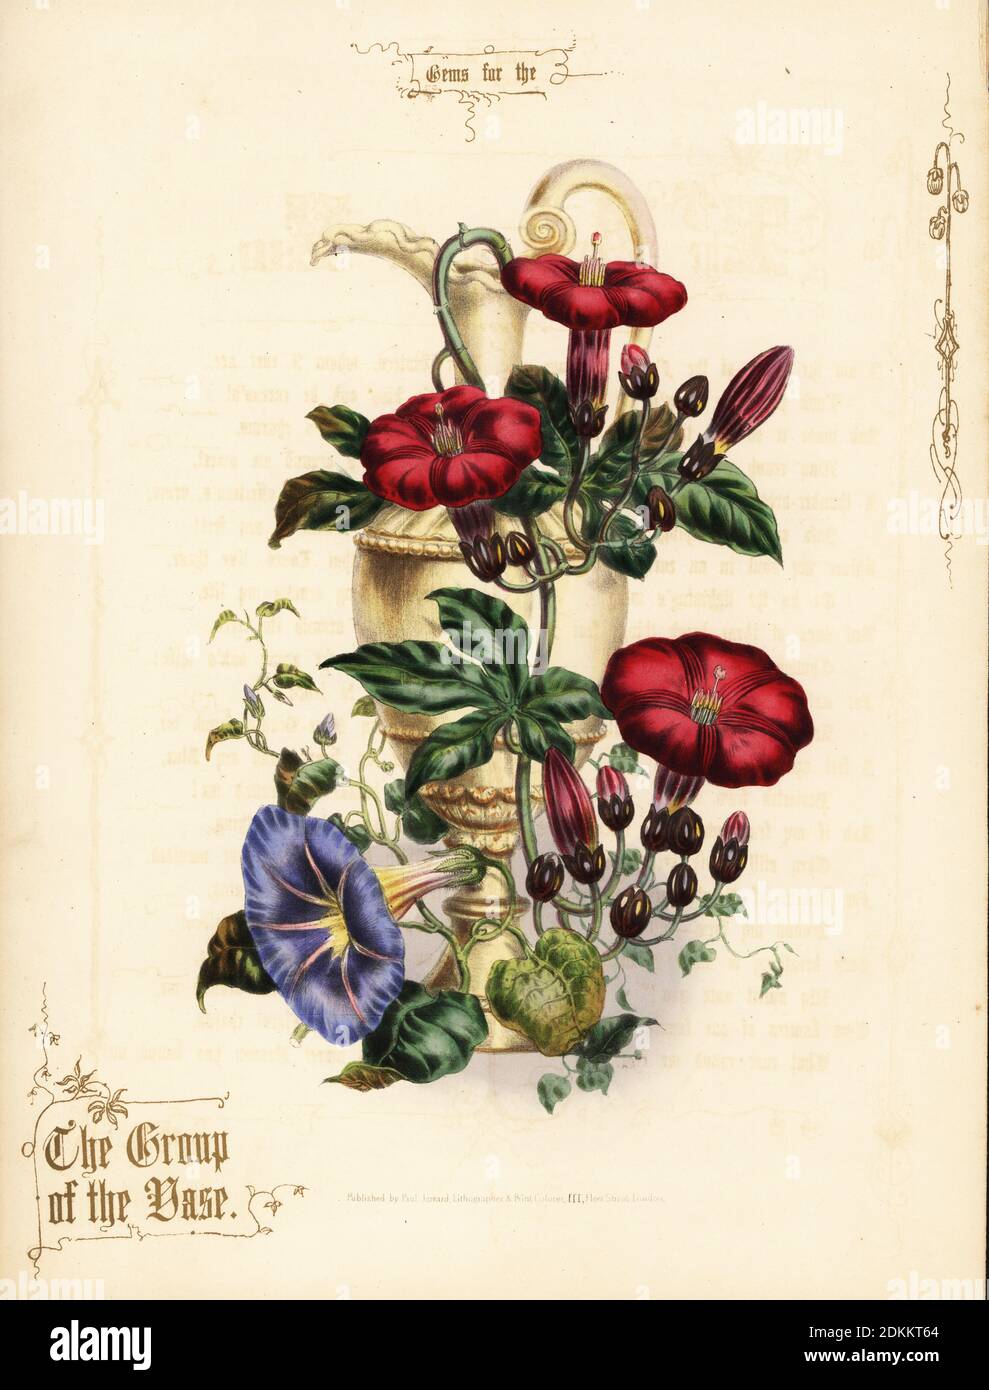 Bouquet of scarlet ipomoea and blue morning glory with vase. The Group of the Vase. Hand-coloured lithograph with gold calligraphy by Paul Jerrard from his own Gems for the Drawing Room, Paul Jerrard, 111 Fleet Street, London, 1852. Jerrard was a Victorian lithographer and print colourer active in London. Stock Photo